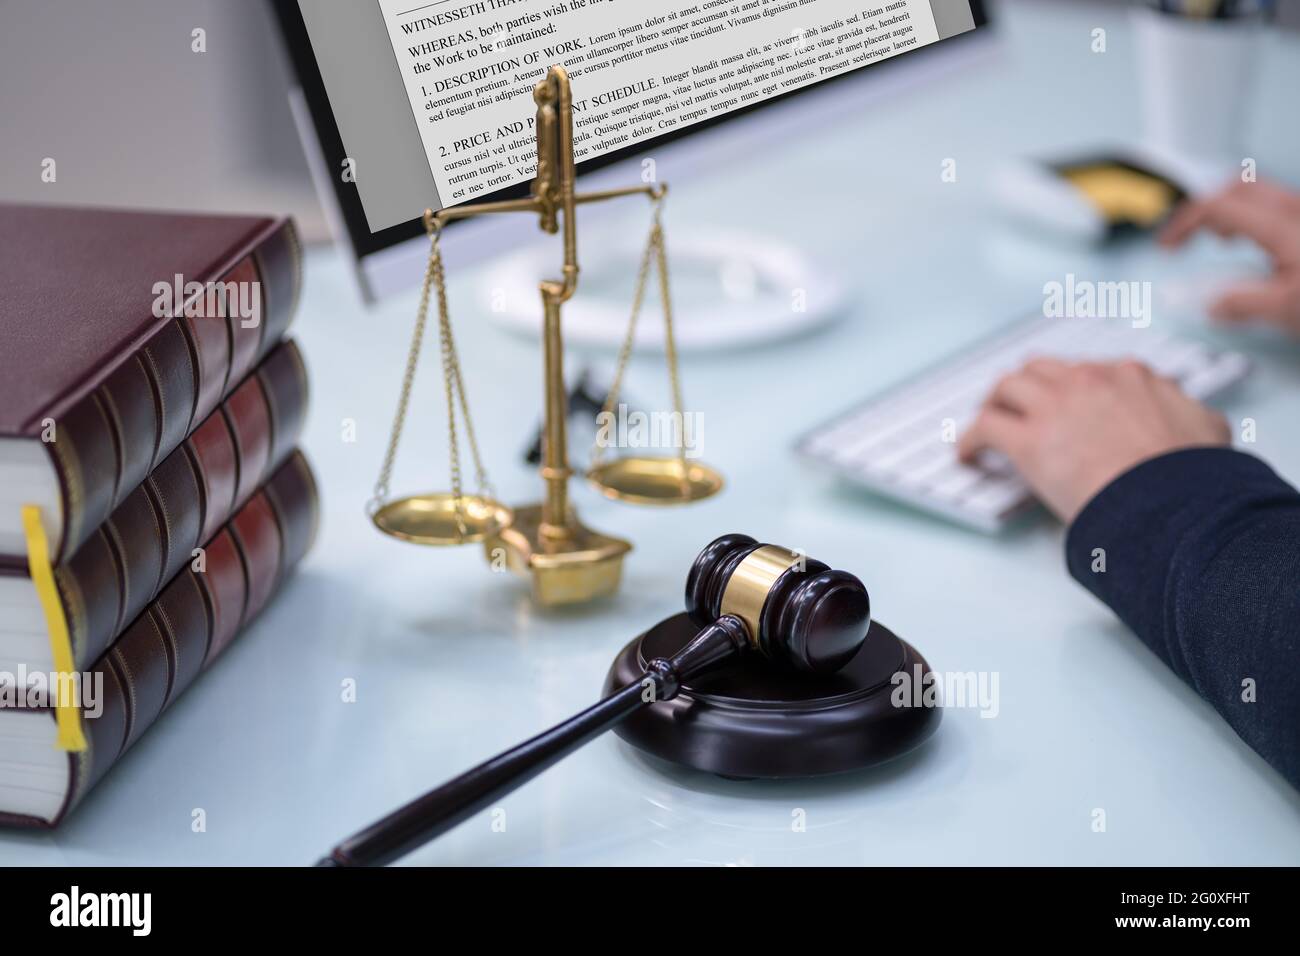 Online Law And Legal Tech. Lawyer Using Technology Stock Photo - Alamy